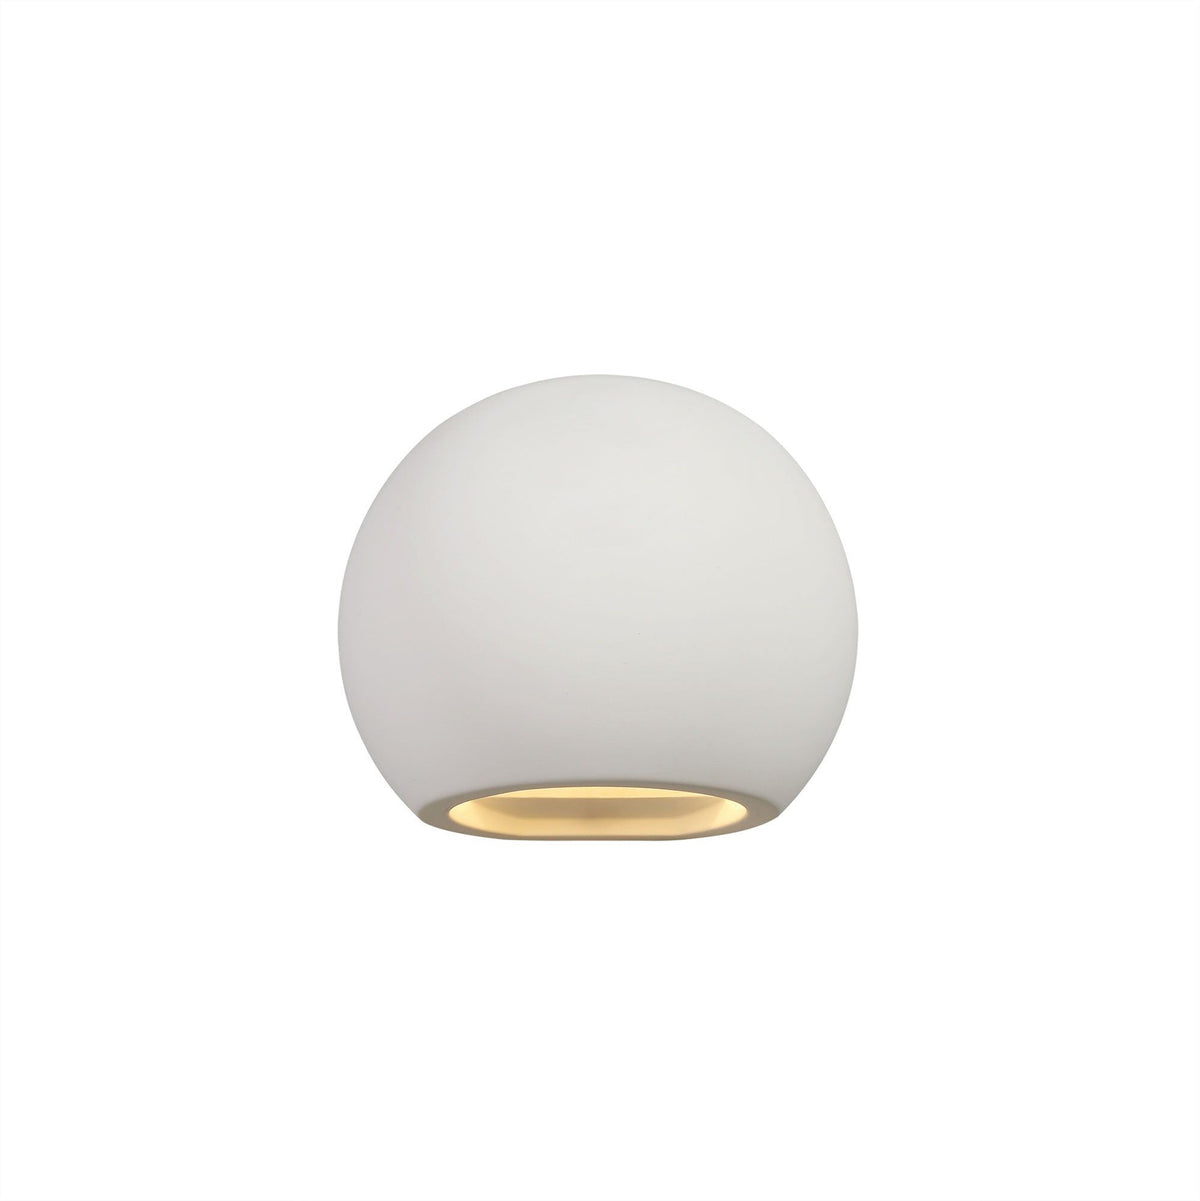 Adnonis Round Ball Up & Down Wall Lamp, 1 x G9, White Paintable Gypsum